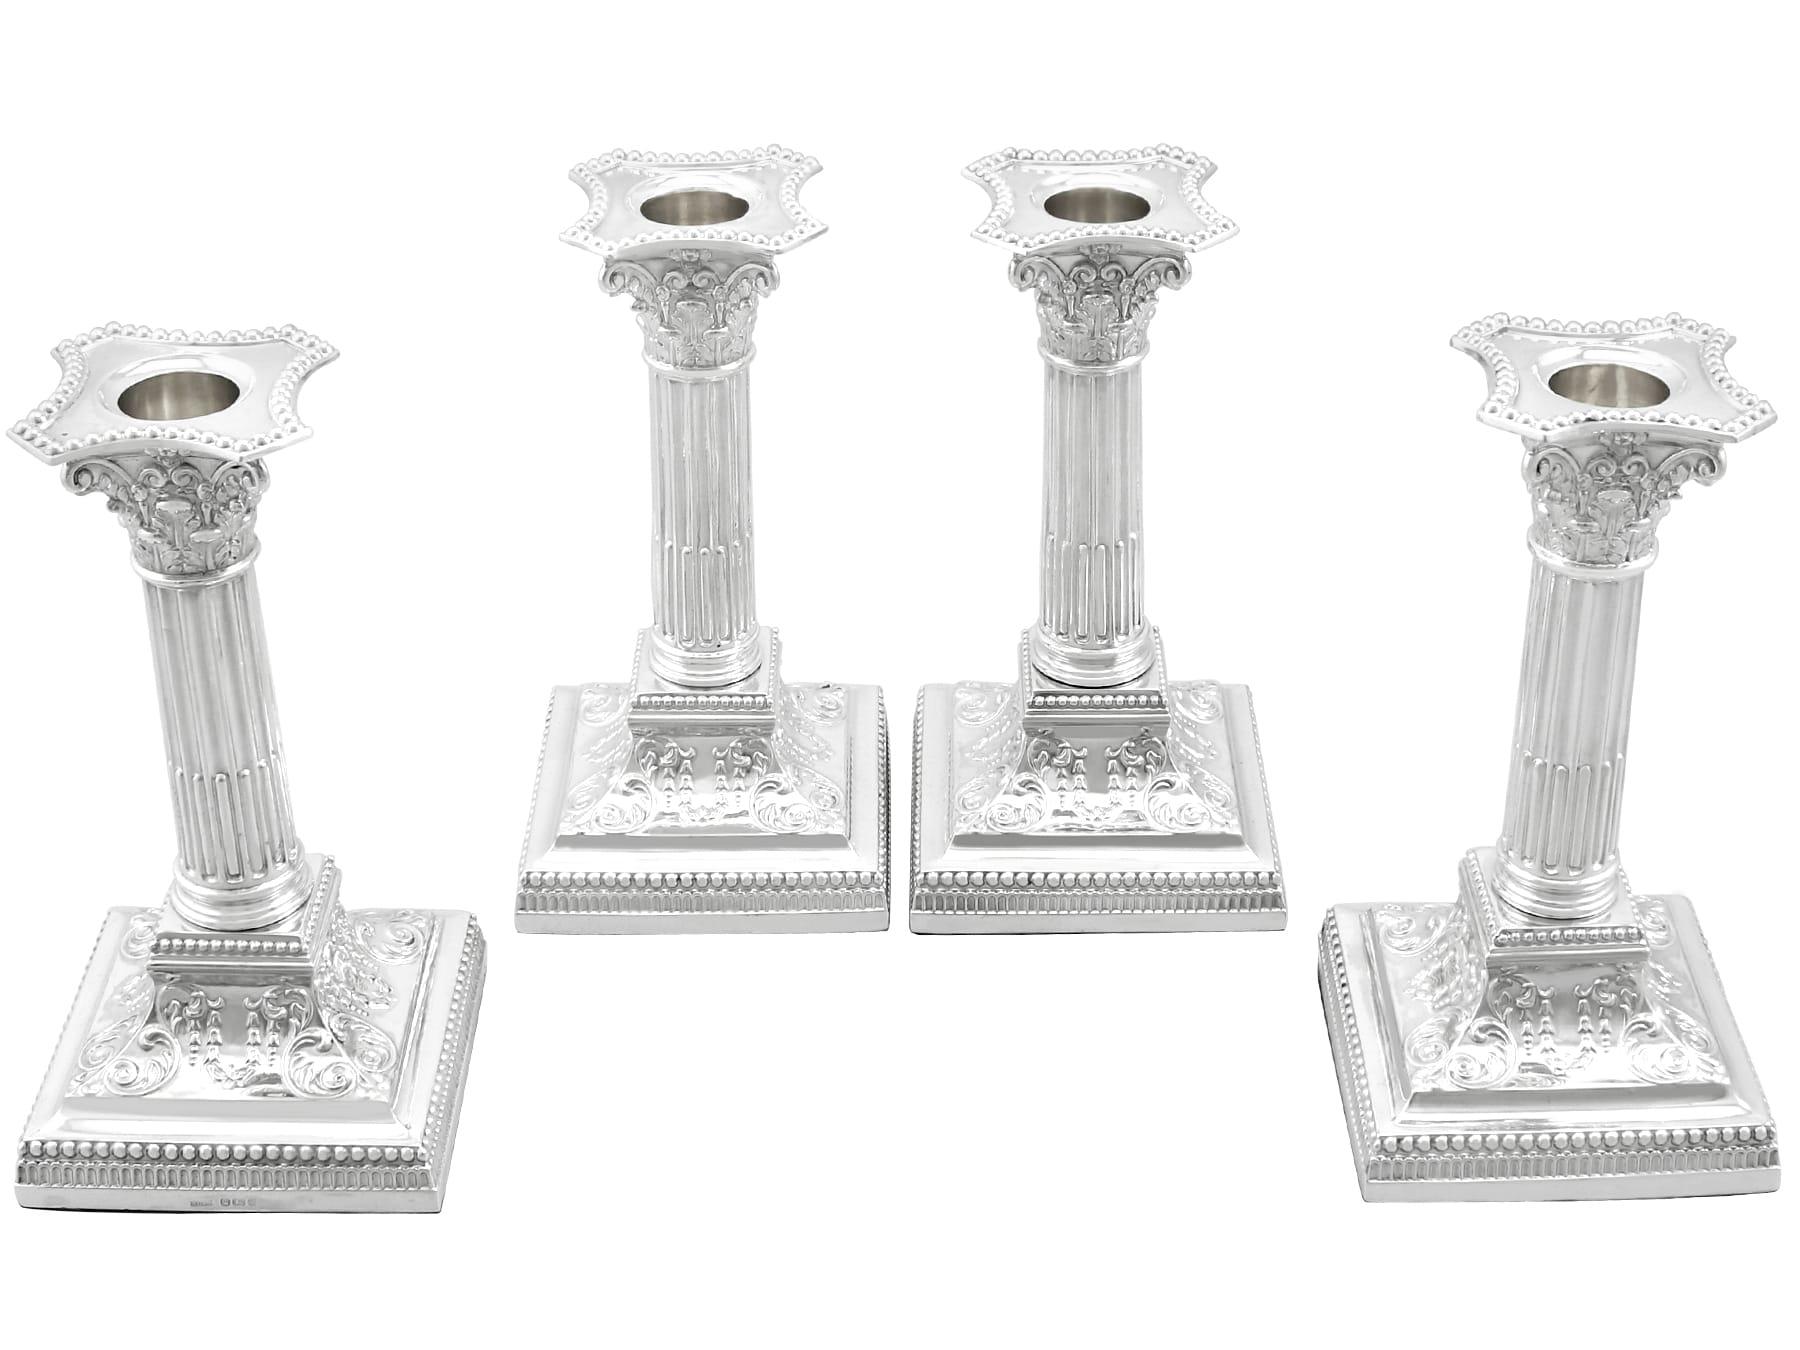 An exceptional, fine and impressive set of four of antique George V English sterling silver piano candlesticks; an addition to our antique silverware collection.

These exceptional, fine and impressive antique George V sterling silver piano